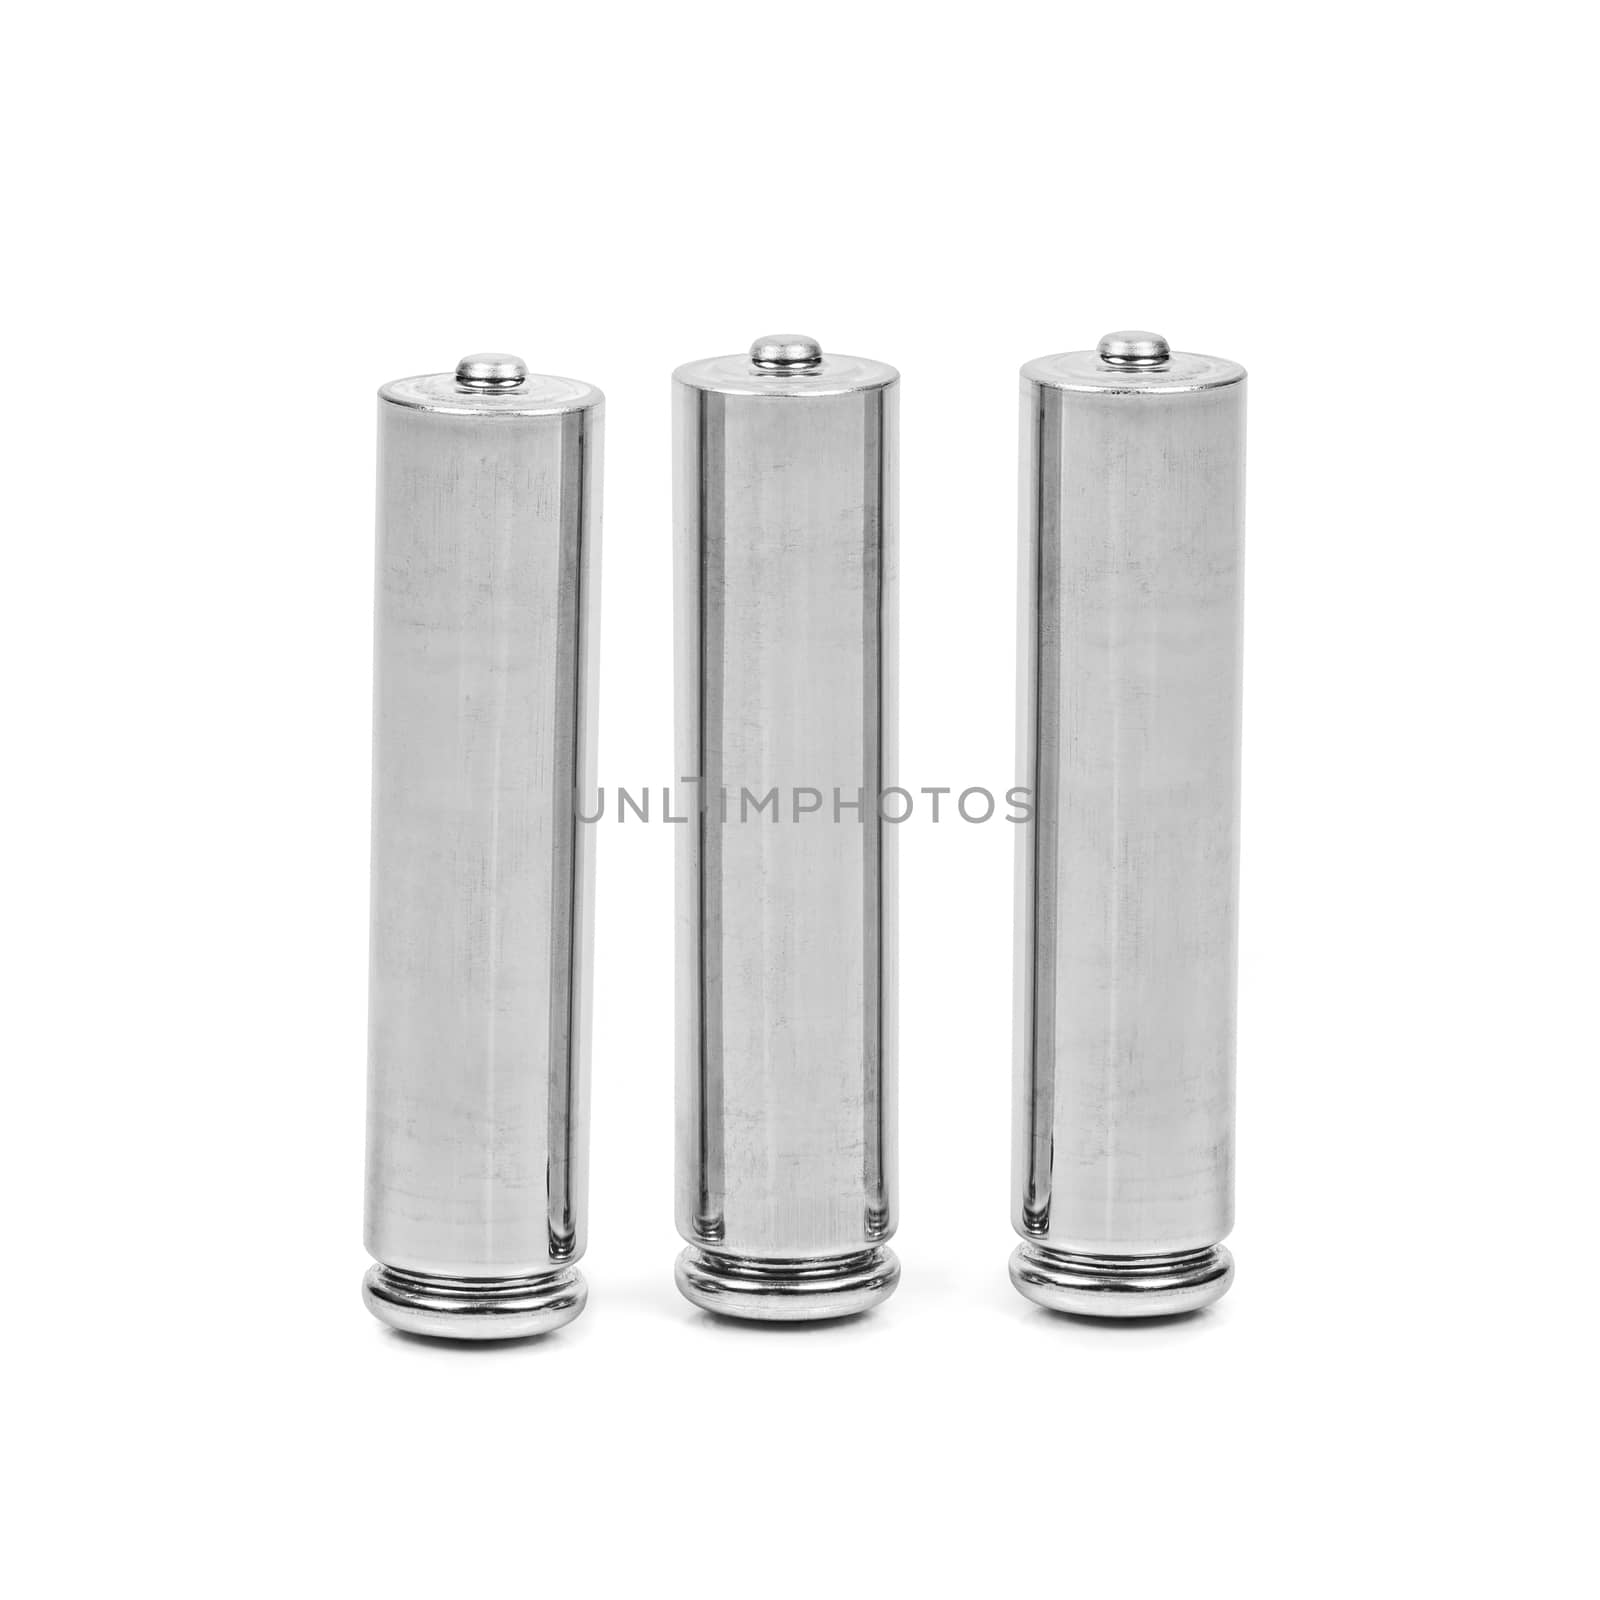 Three AAA batteries on white background by mkos83